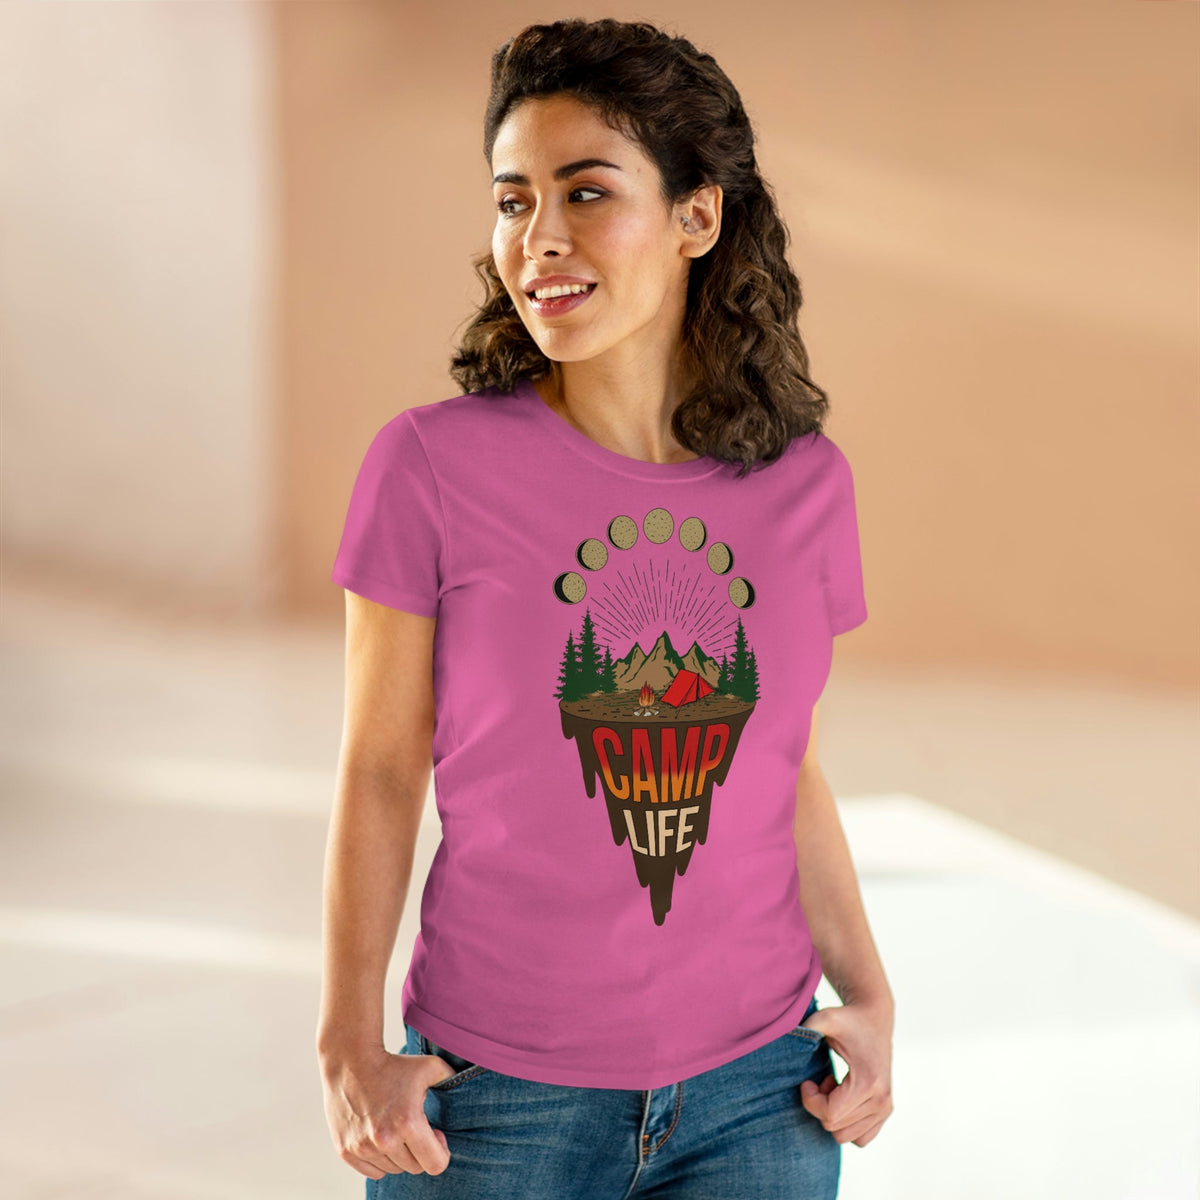 Camp Life Women's Midweight Cotton Tee - Salty Medic Clothing Co.